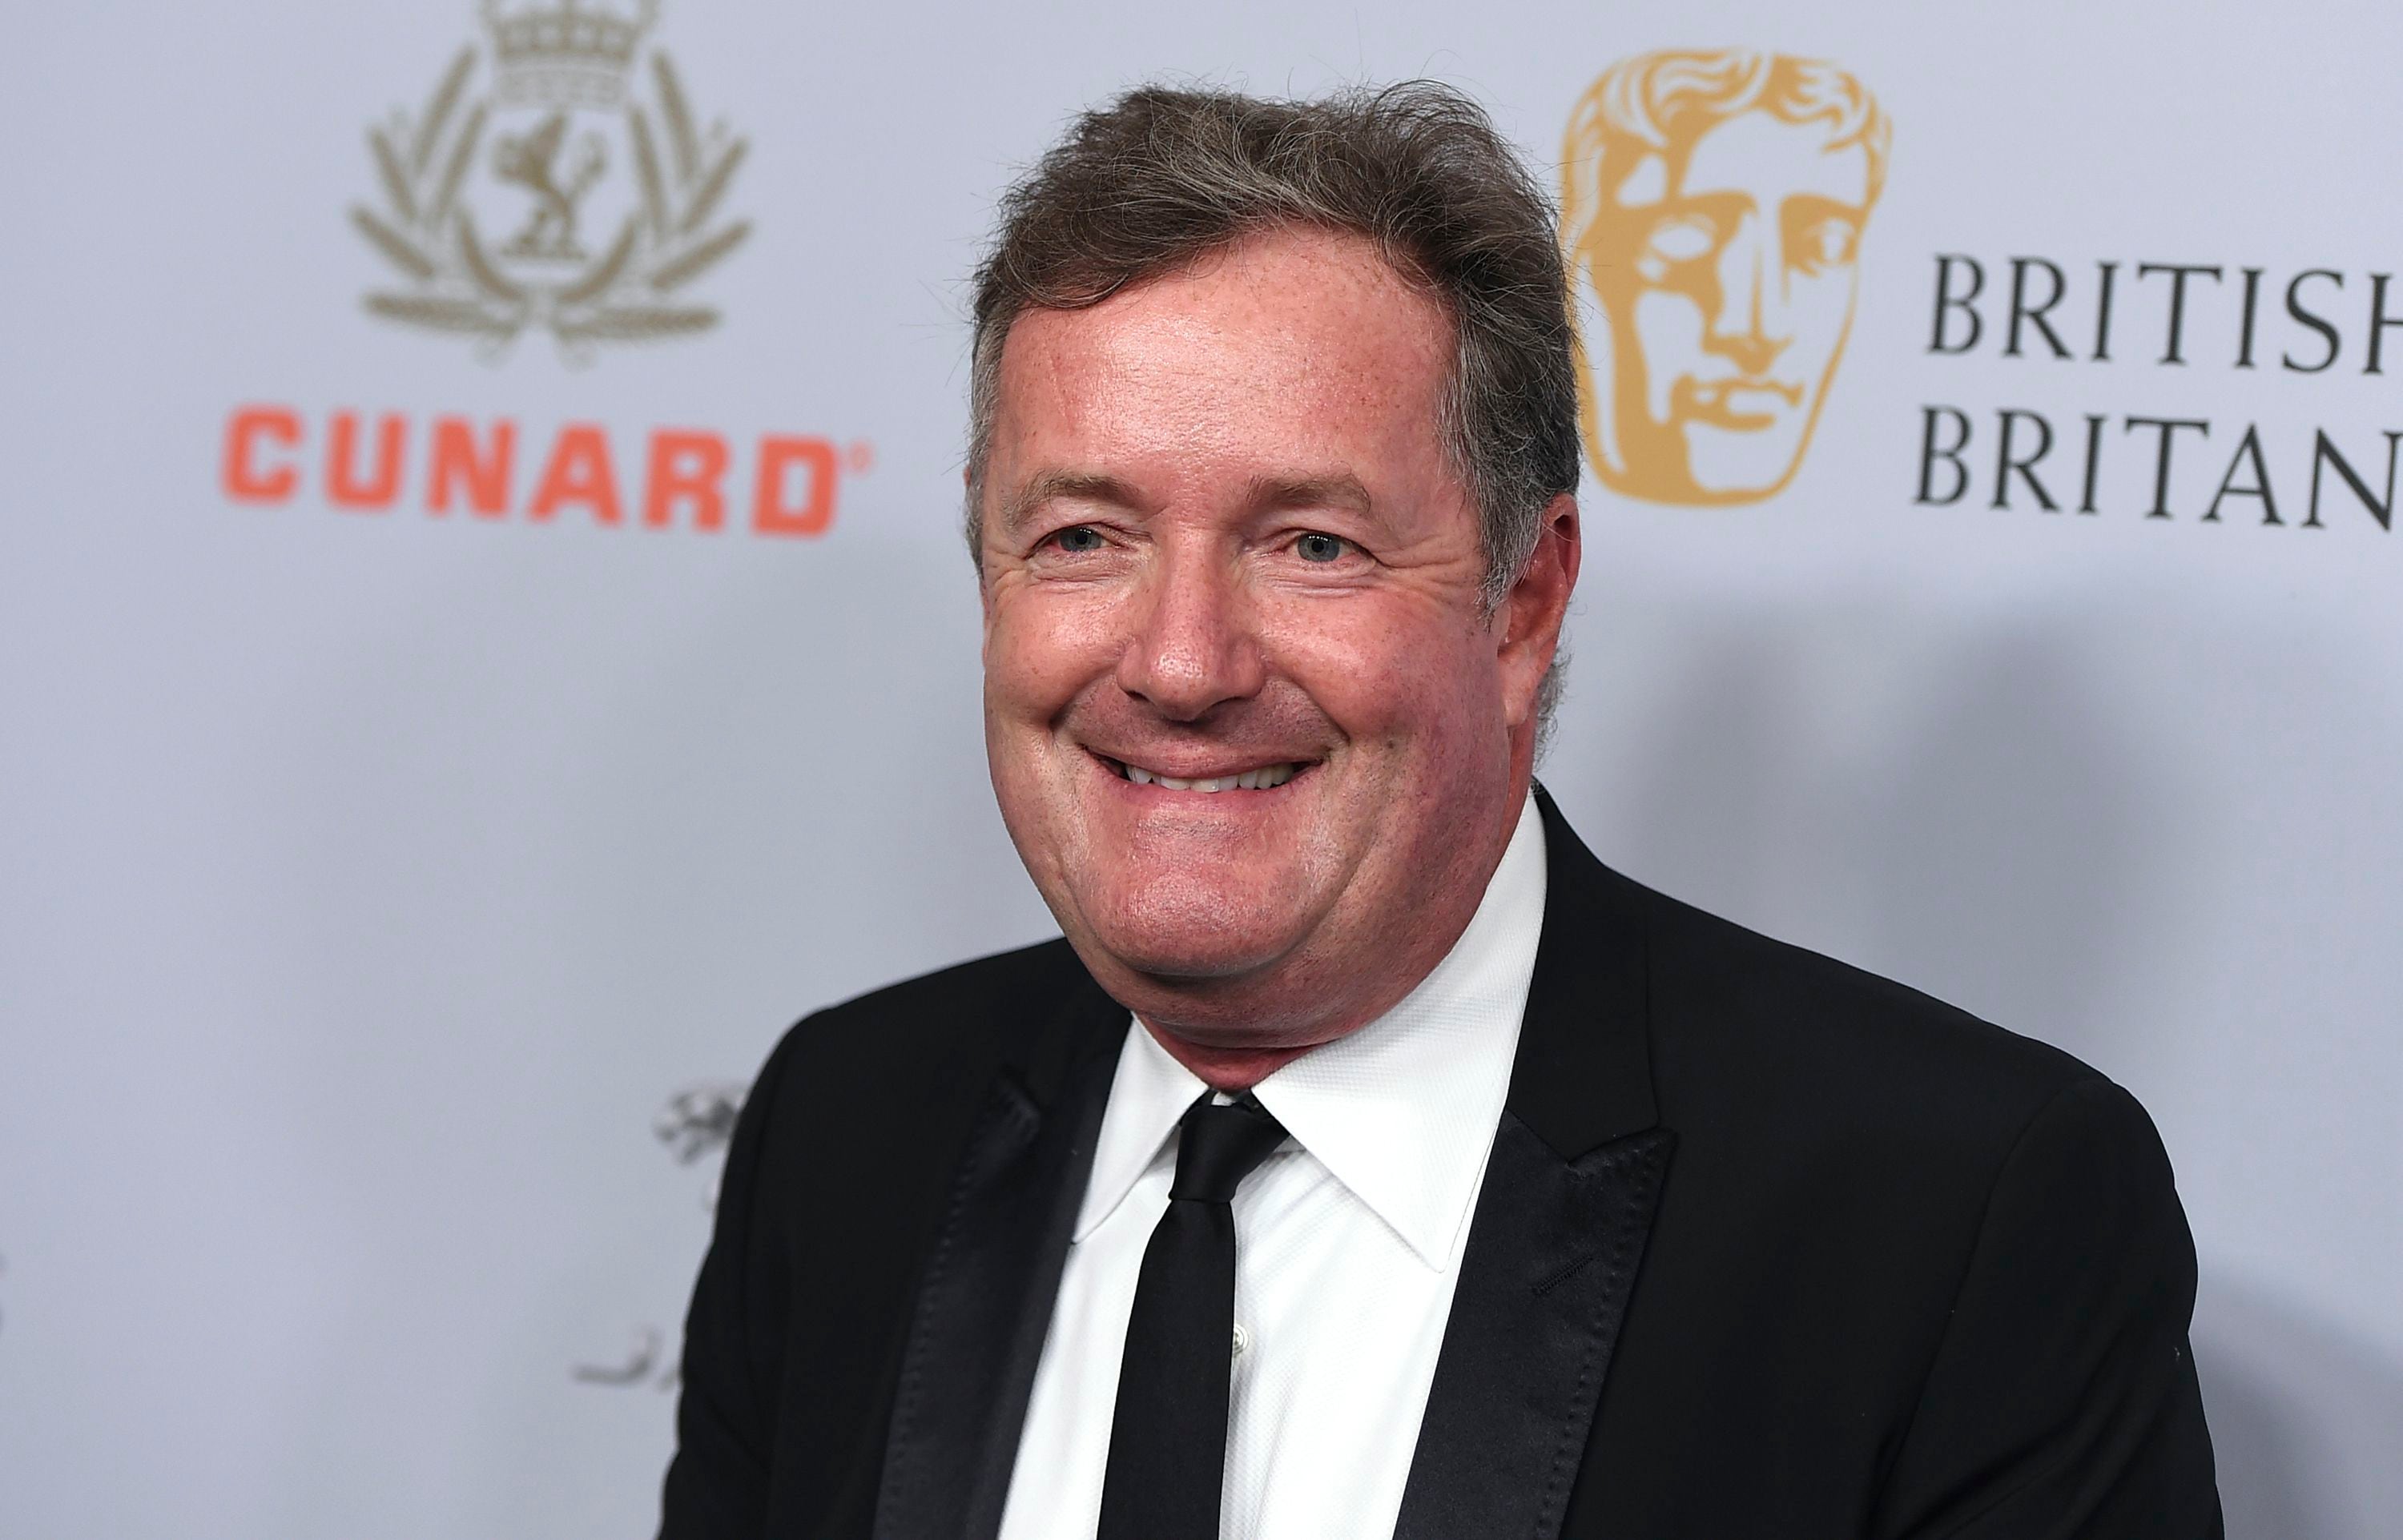 Piers Morgan to launch new TV show in deal with News Corp